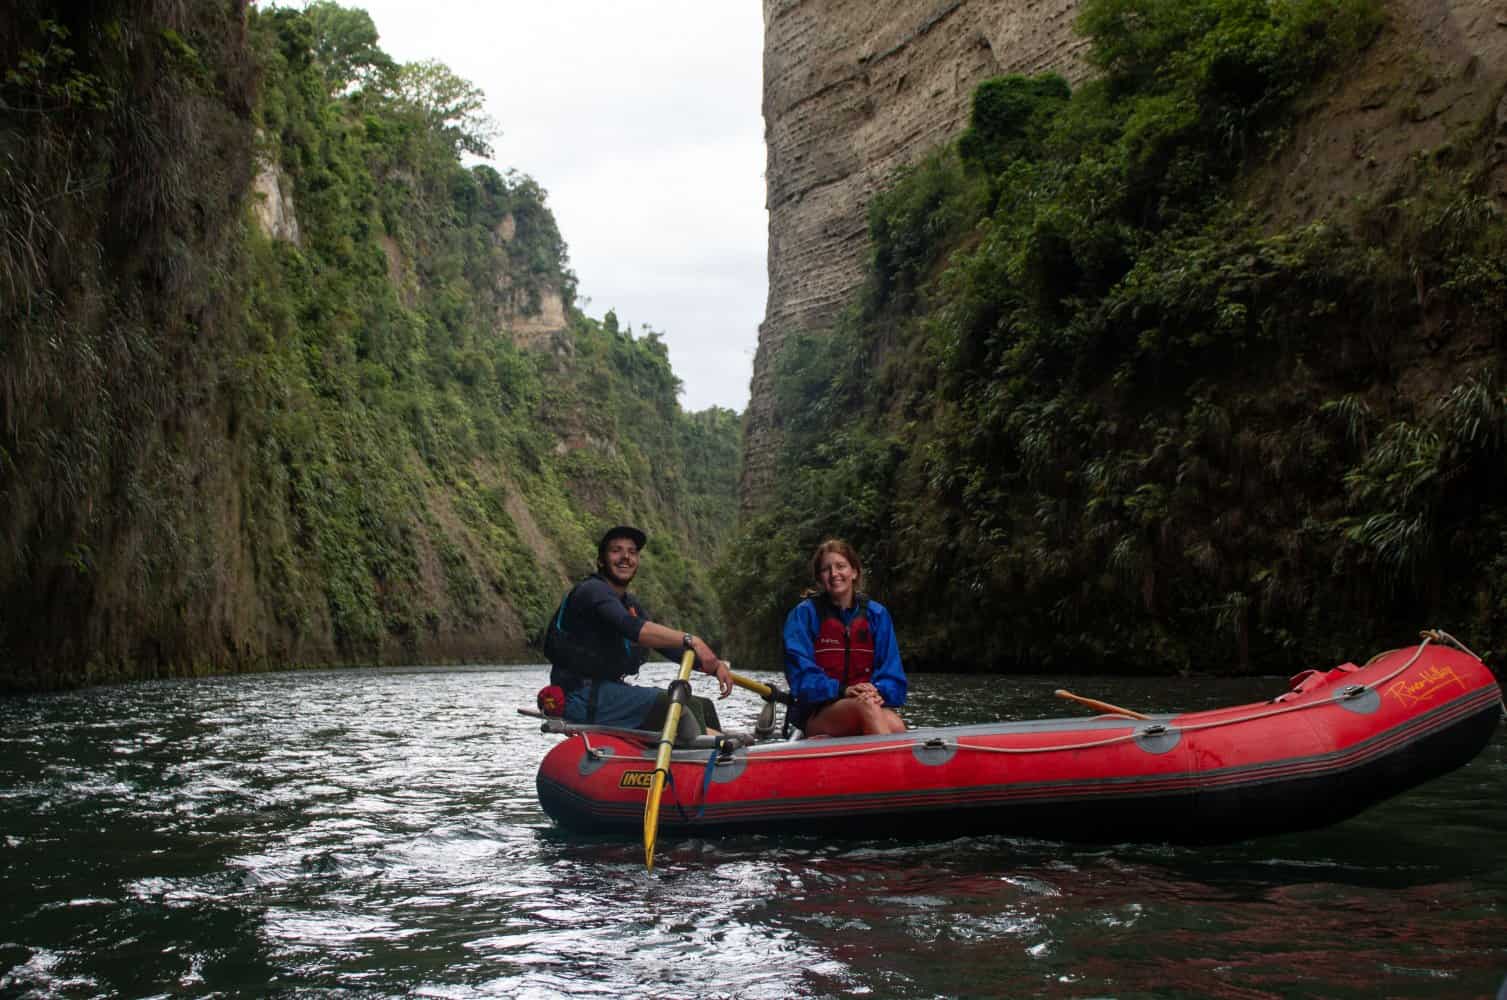 Deluxe accommodation and 2 days of guided rafting on the Rangitikei River